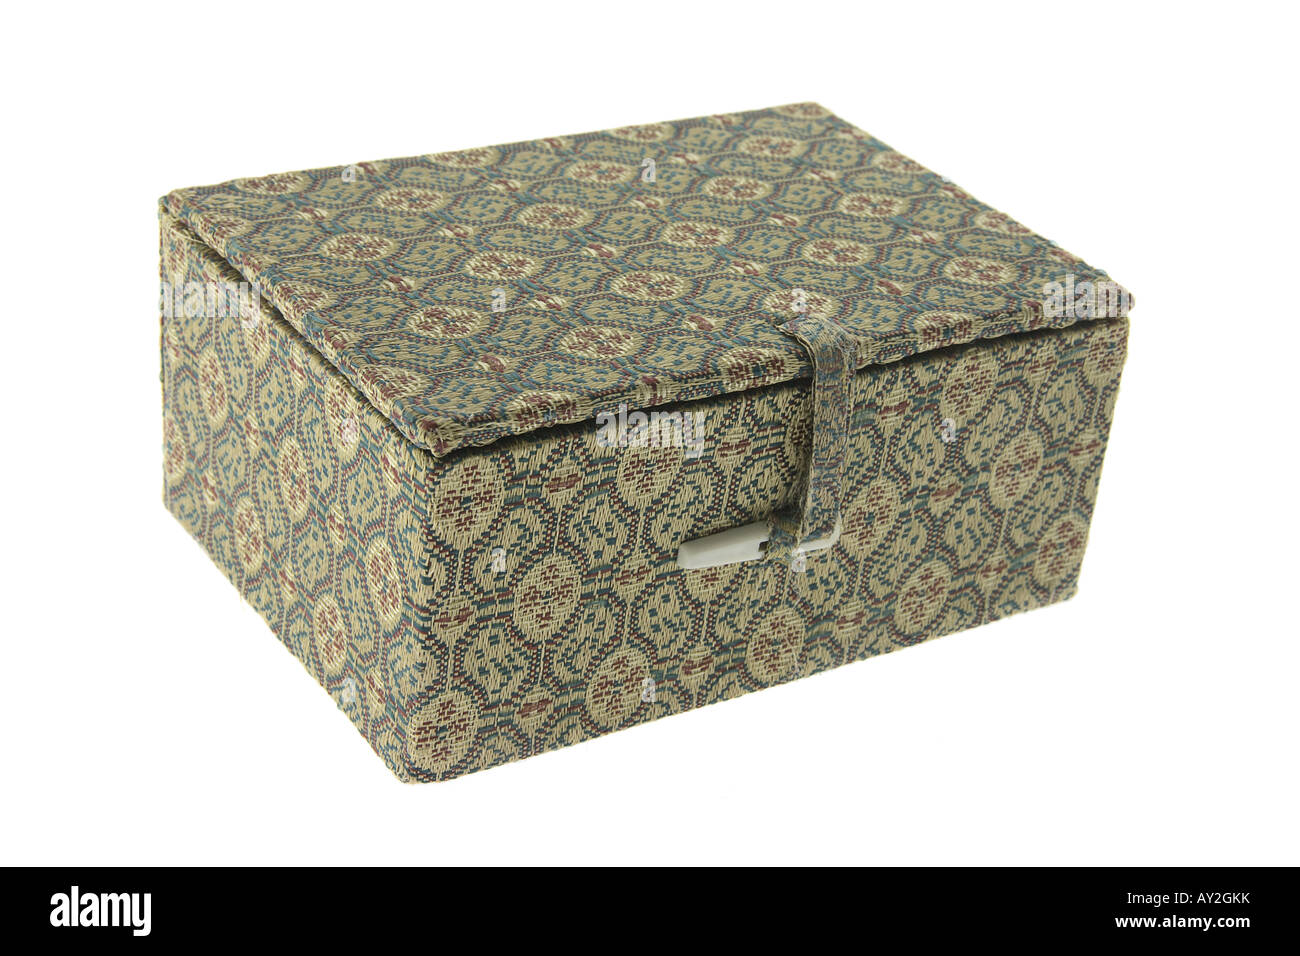 Chinese box Cut Out Stock Images & Pictures - Alamy